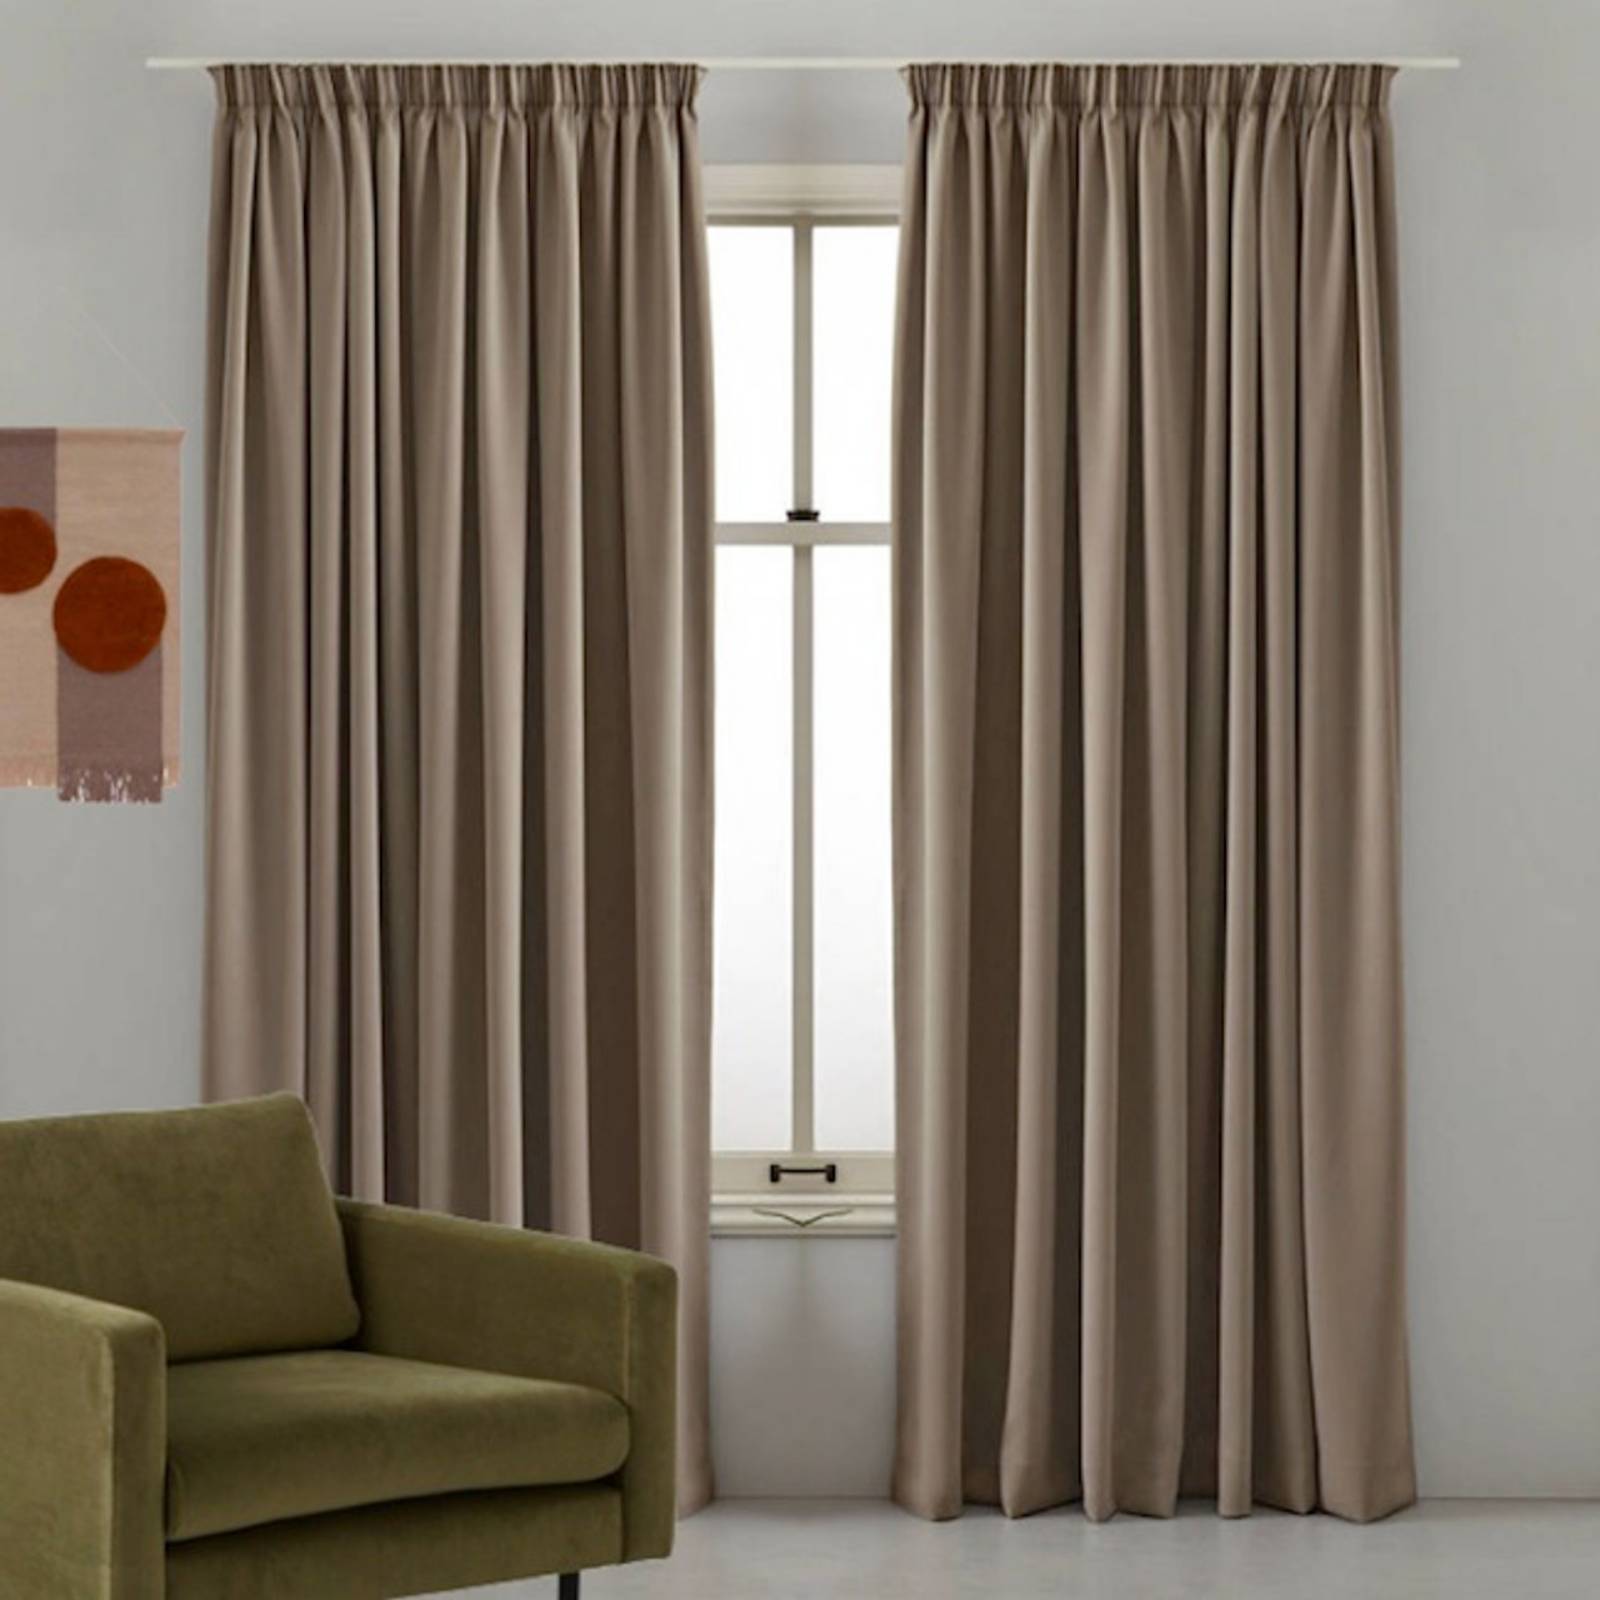 Benefits of Pencil Pleat Curtains